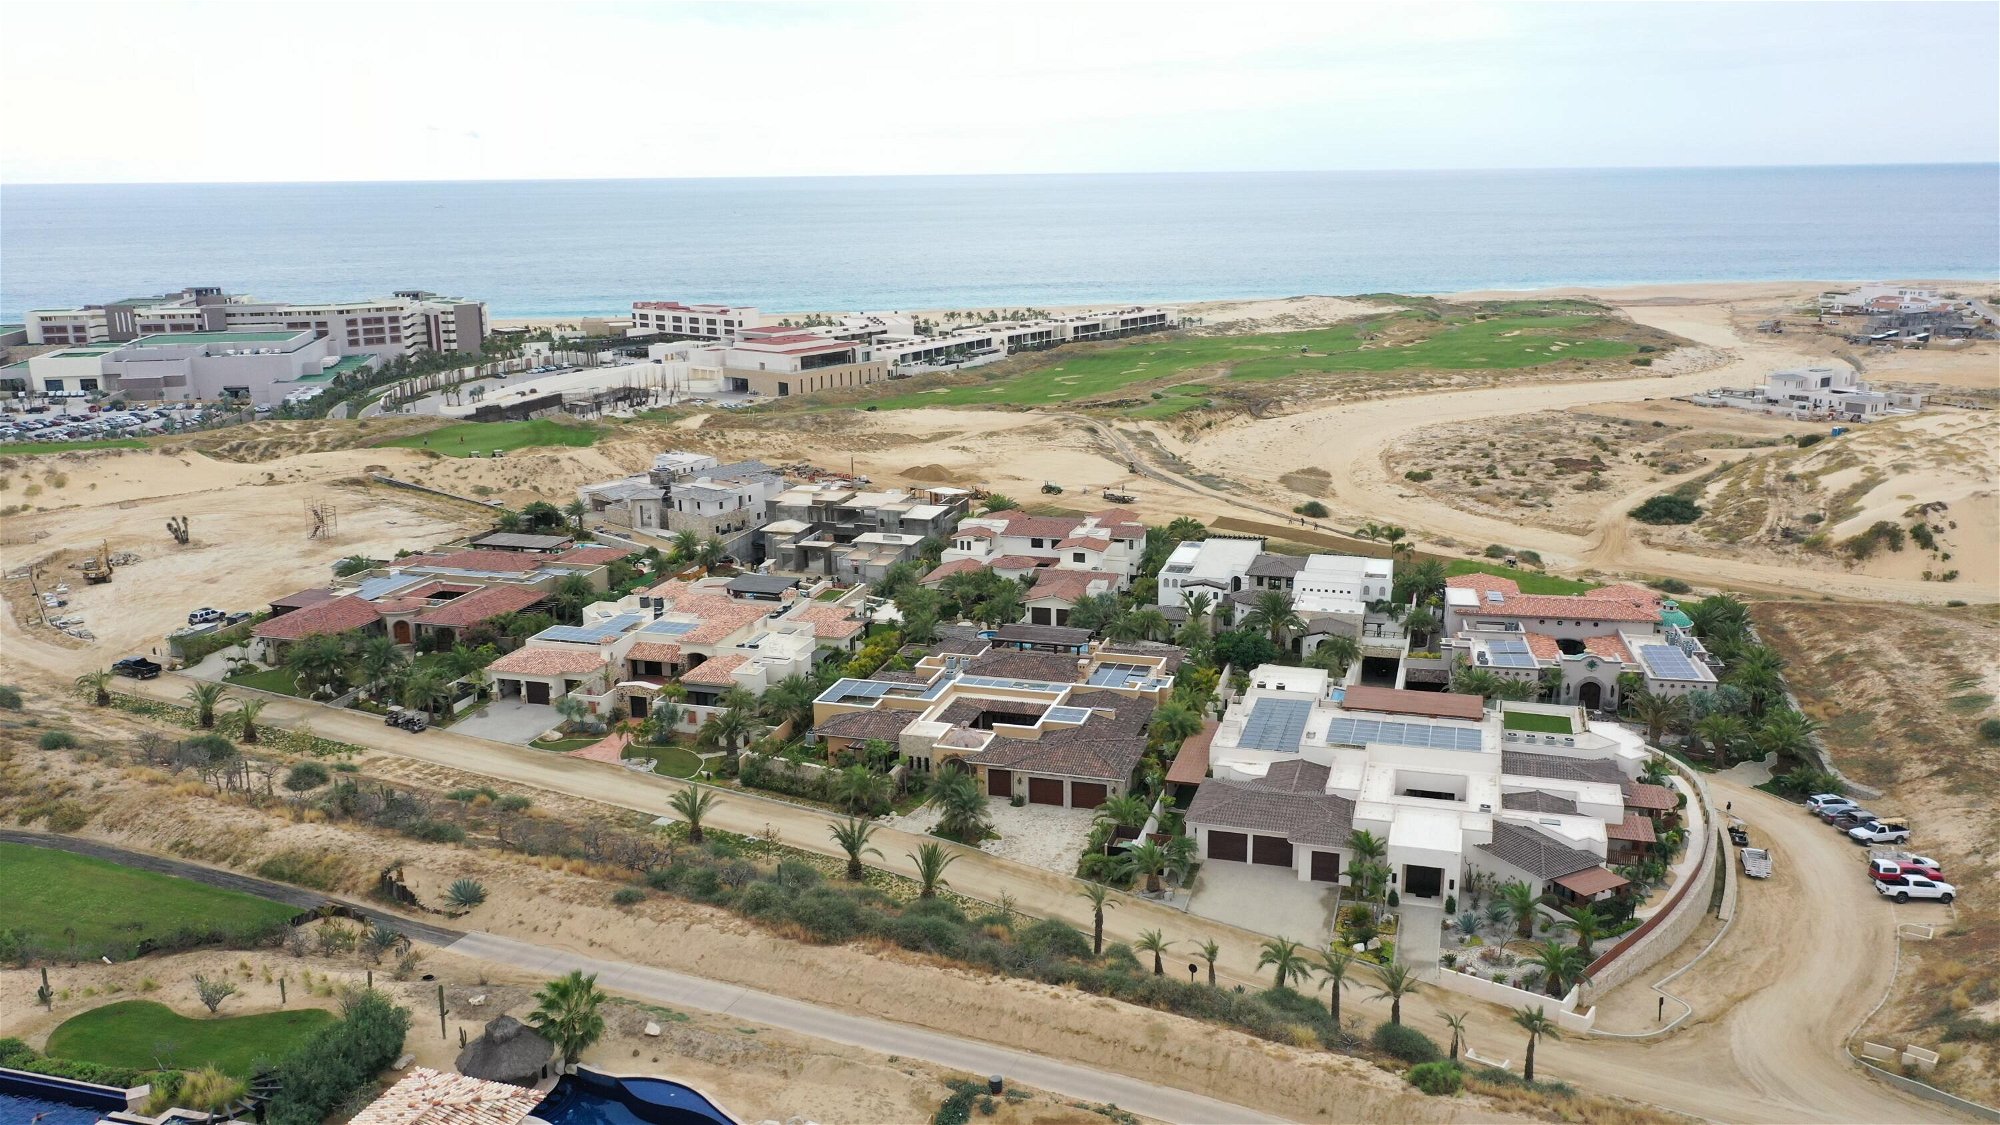 Land For Sale in Cabo San Lucas 3885163071